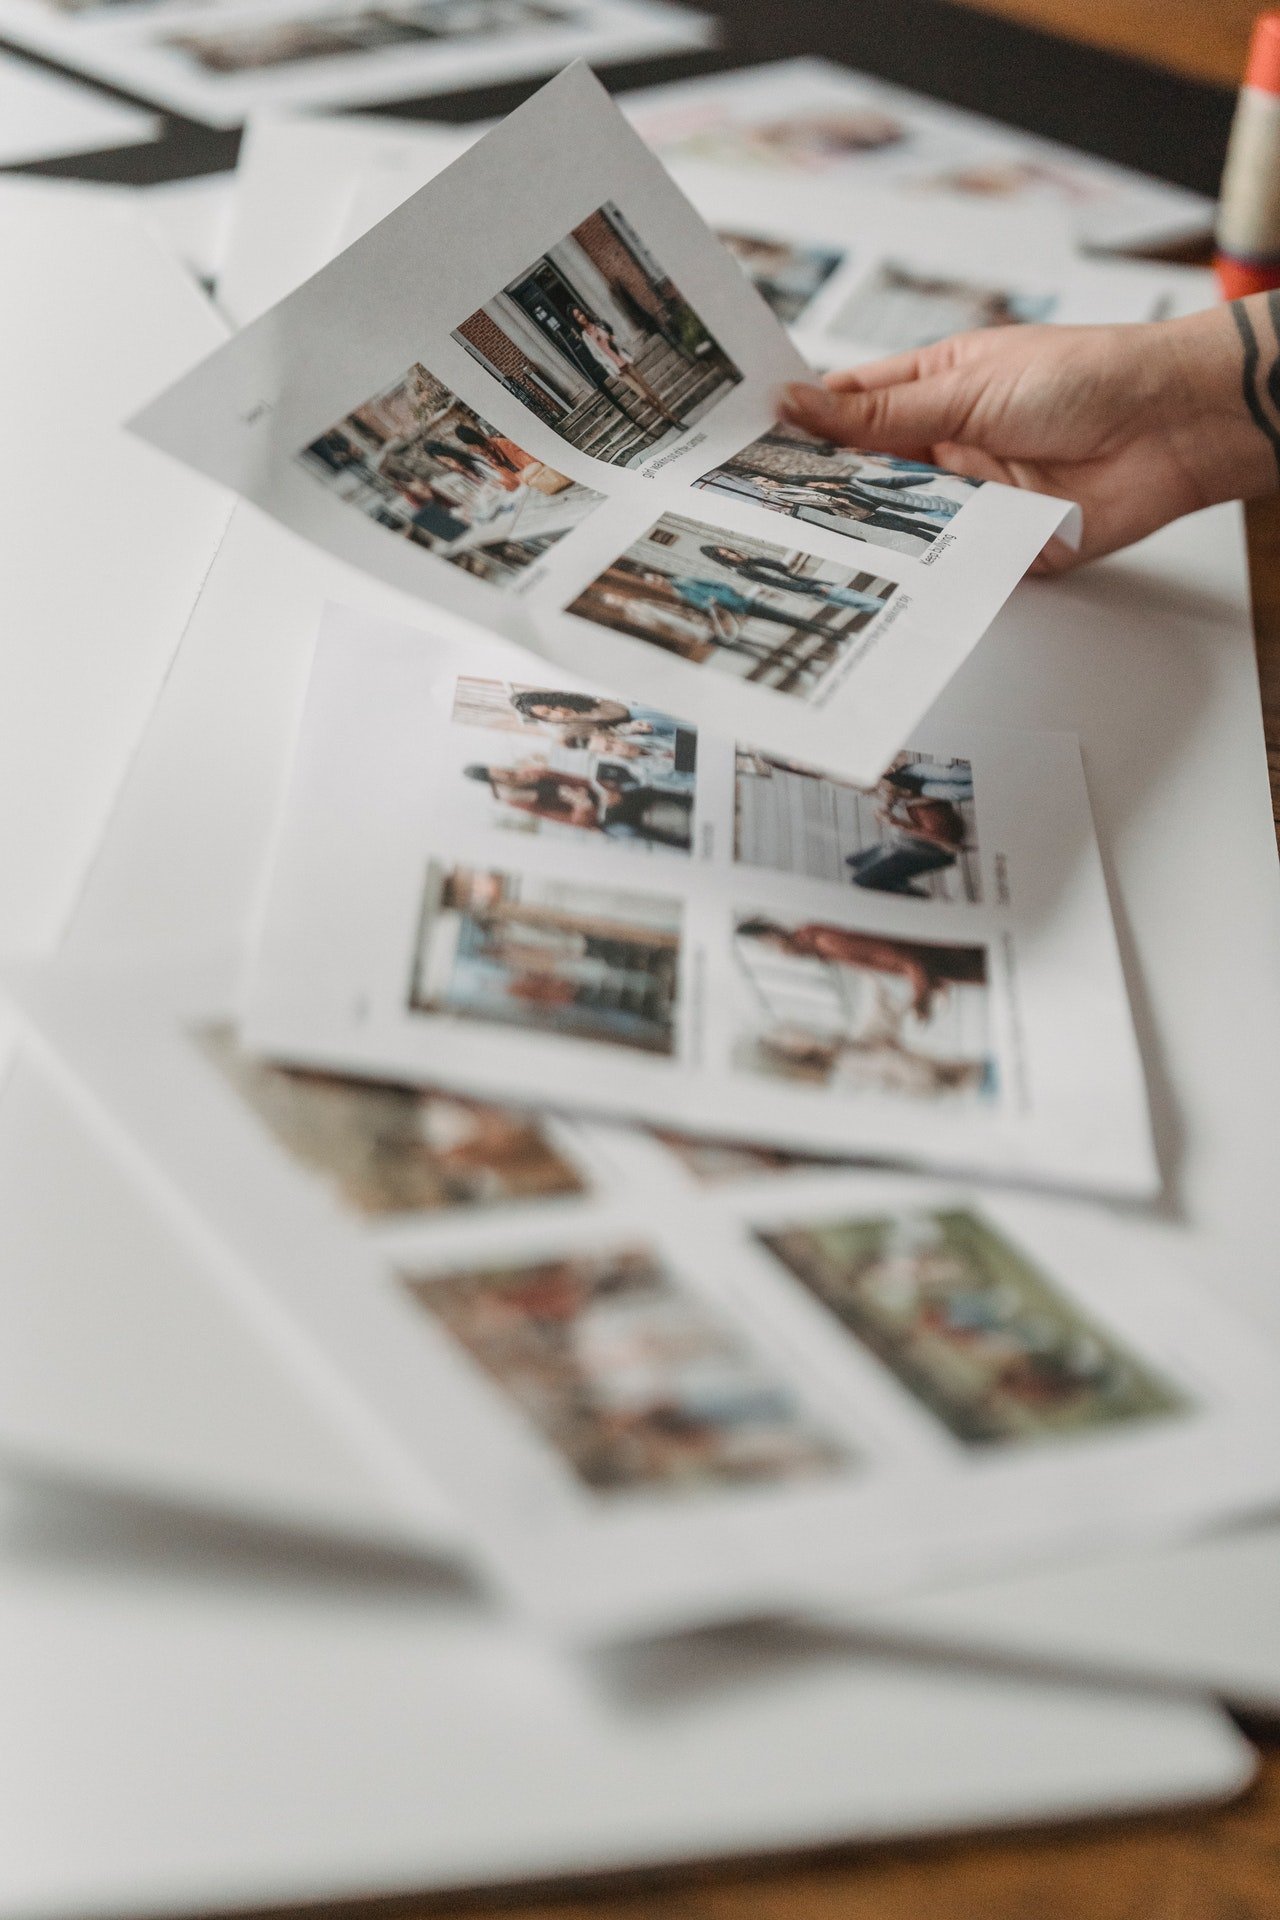 They showed him the house and photo albums. | Source: Pexels